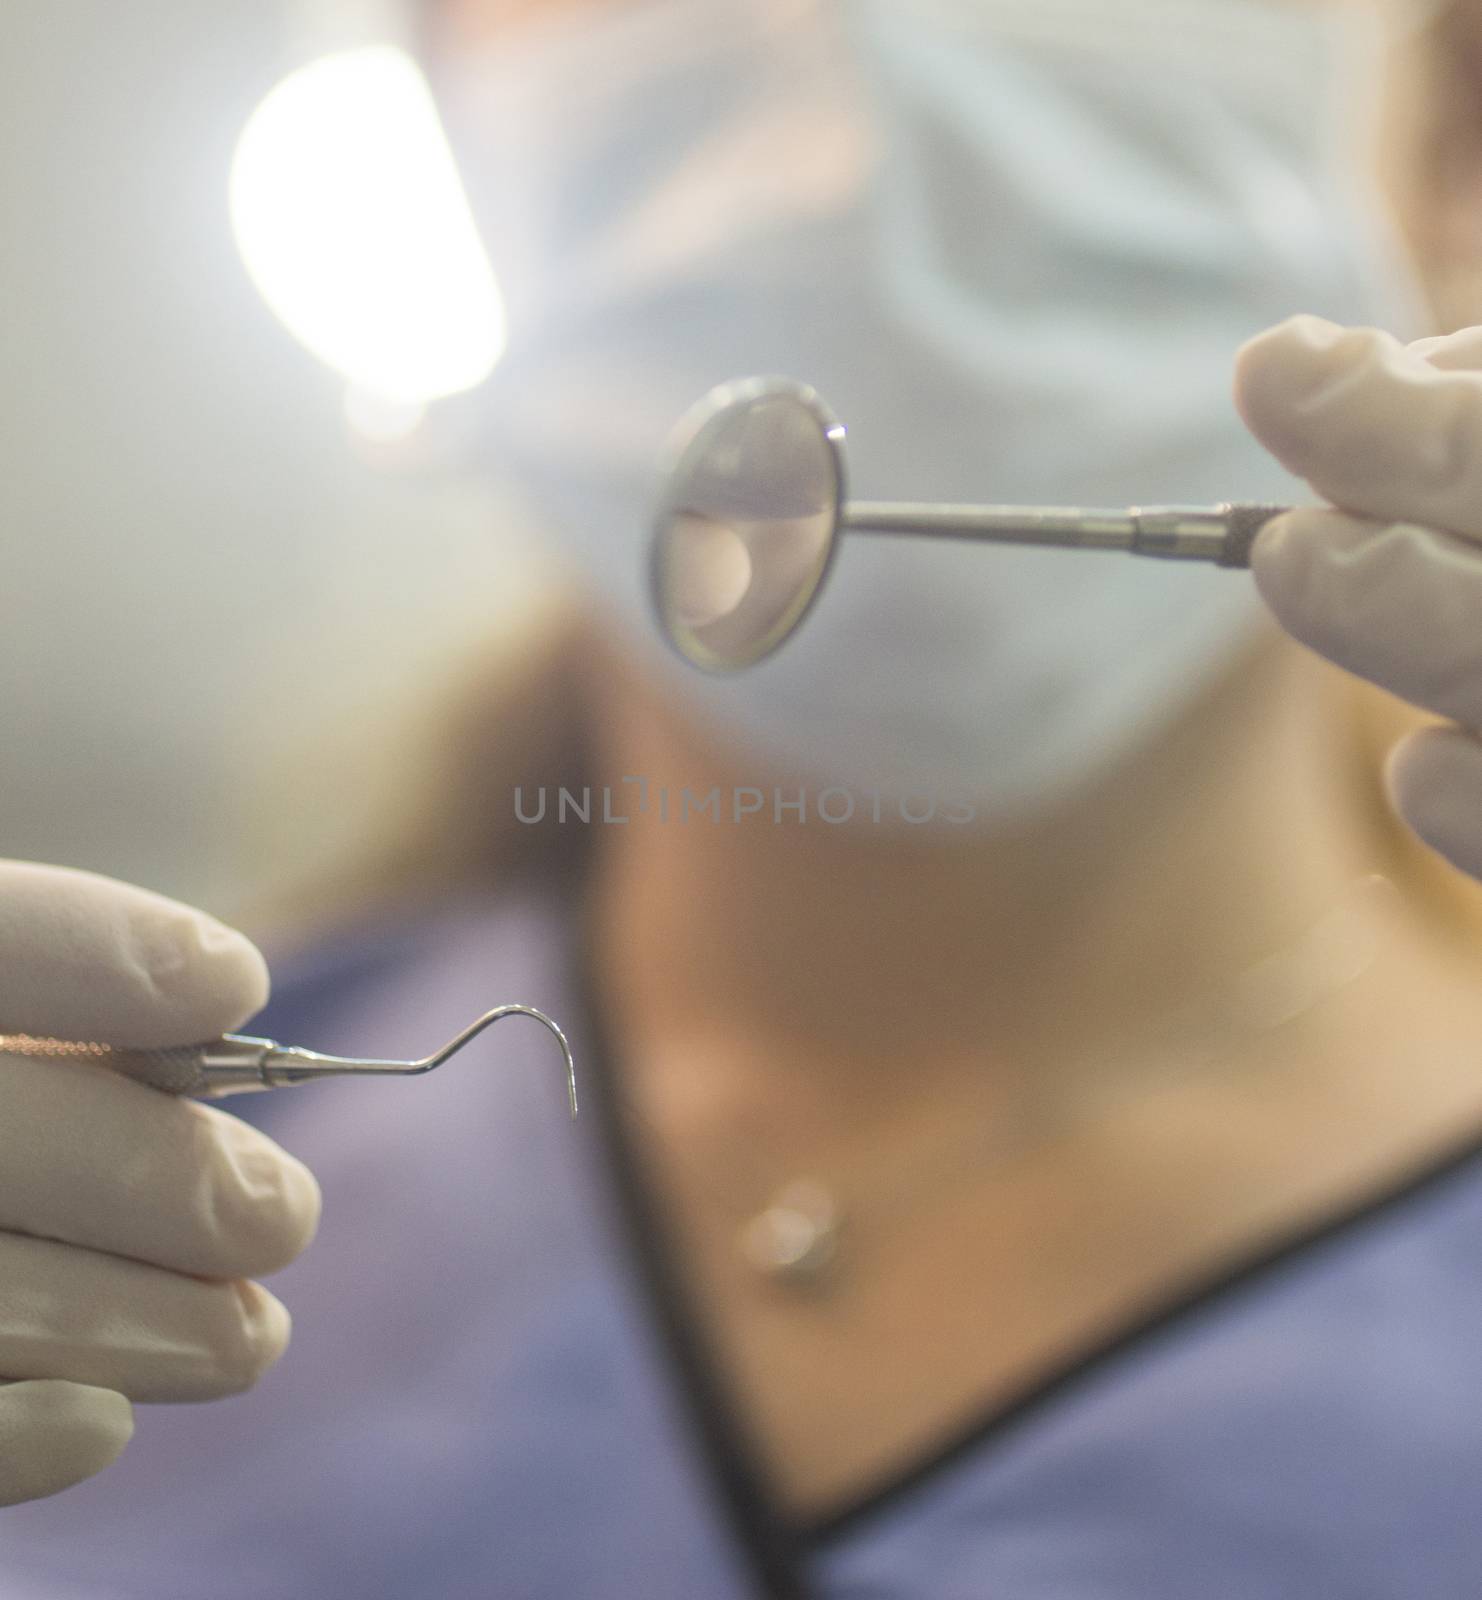 Dental instrumentation dentist pick tooth dental cleaning tool in the hand of dentist wearing face mask in dentists surgery clinic artistic color photo with shallow depth of focus.